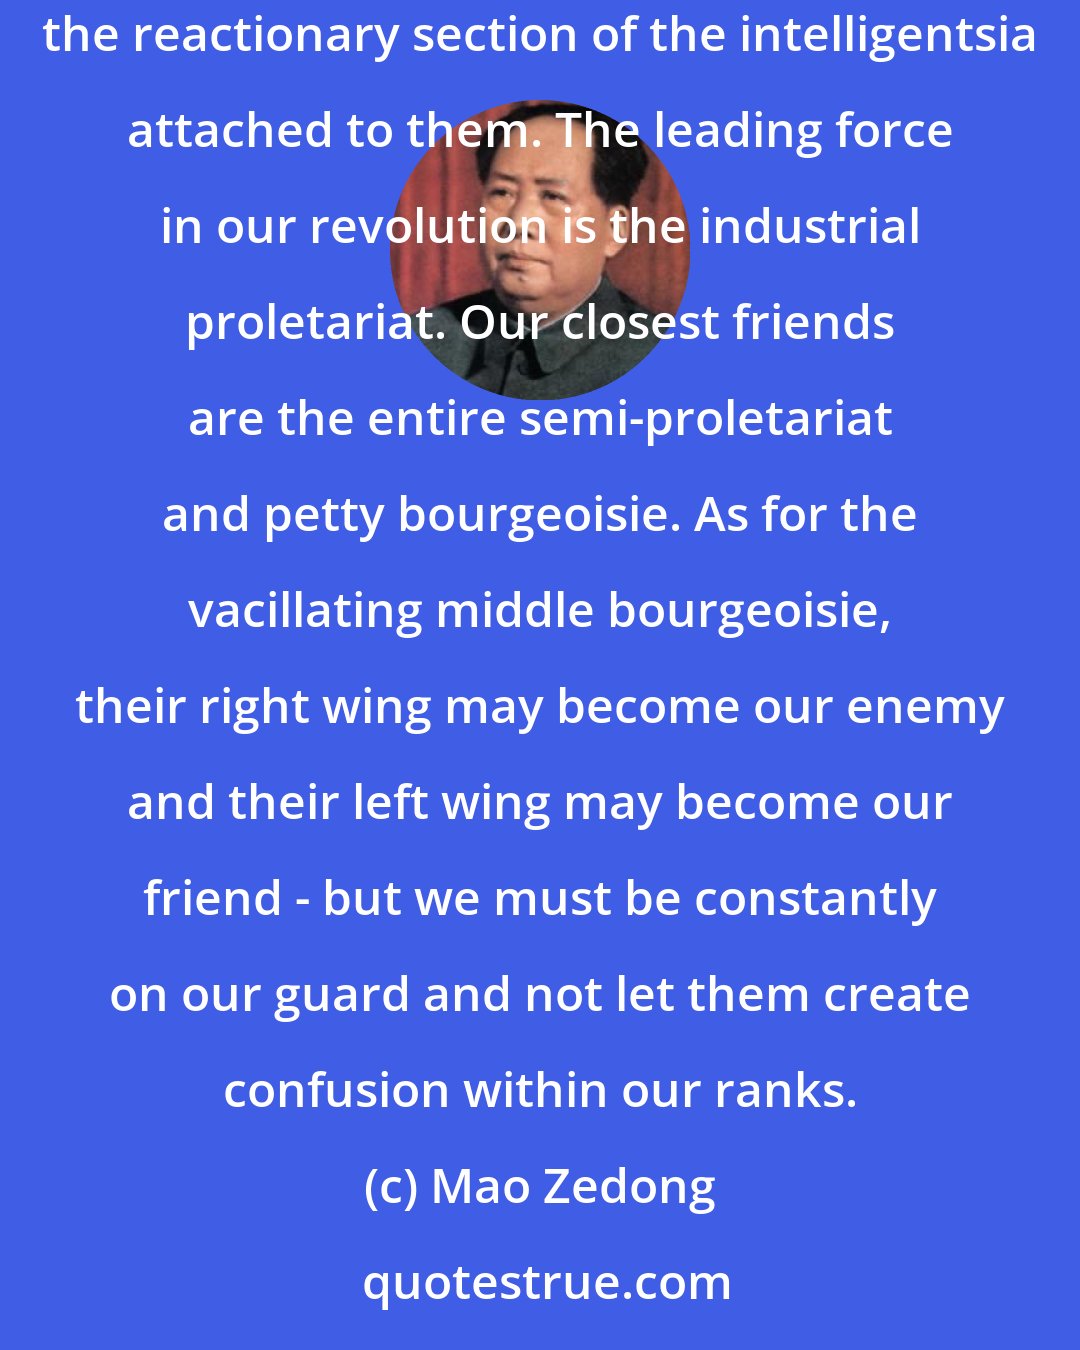 Mao Zedong: Our enemies are all those in league with imperialism - the warlords, the bureaucrats, the comprador class, the big Landlord class and the reactionary section of the intelligentsia attached to them. The leading force in our revolution is the industrial proletariat. Our closest friends are the entire semi-proletariat and petty bourgeoisie. As for the vacillating middle bourgeoisie, their right wing may become our enemy and their left wing may become our friend - but we must be constantly on our guard and not let them create confusion within our ranks.